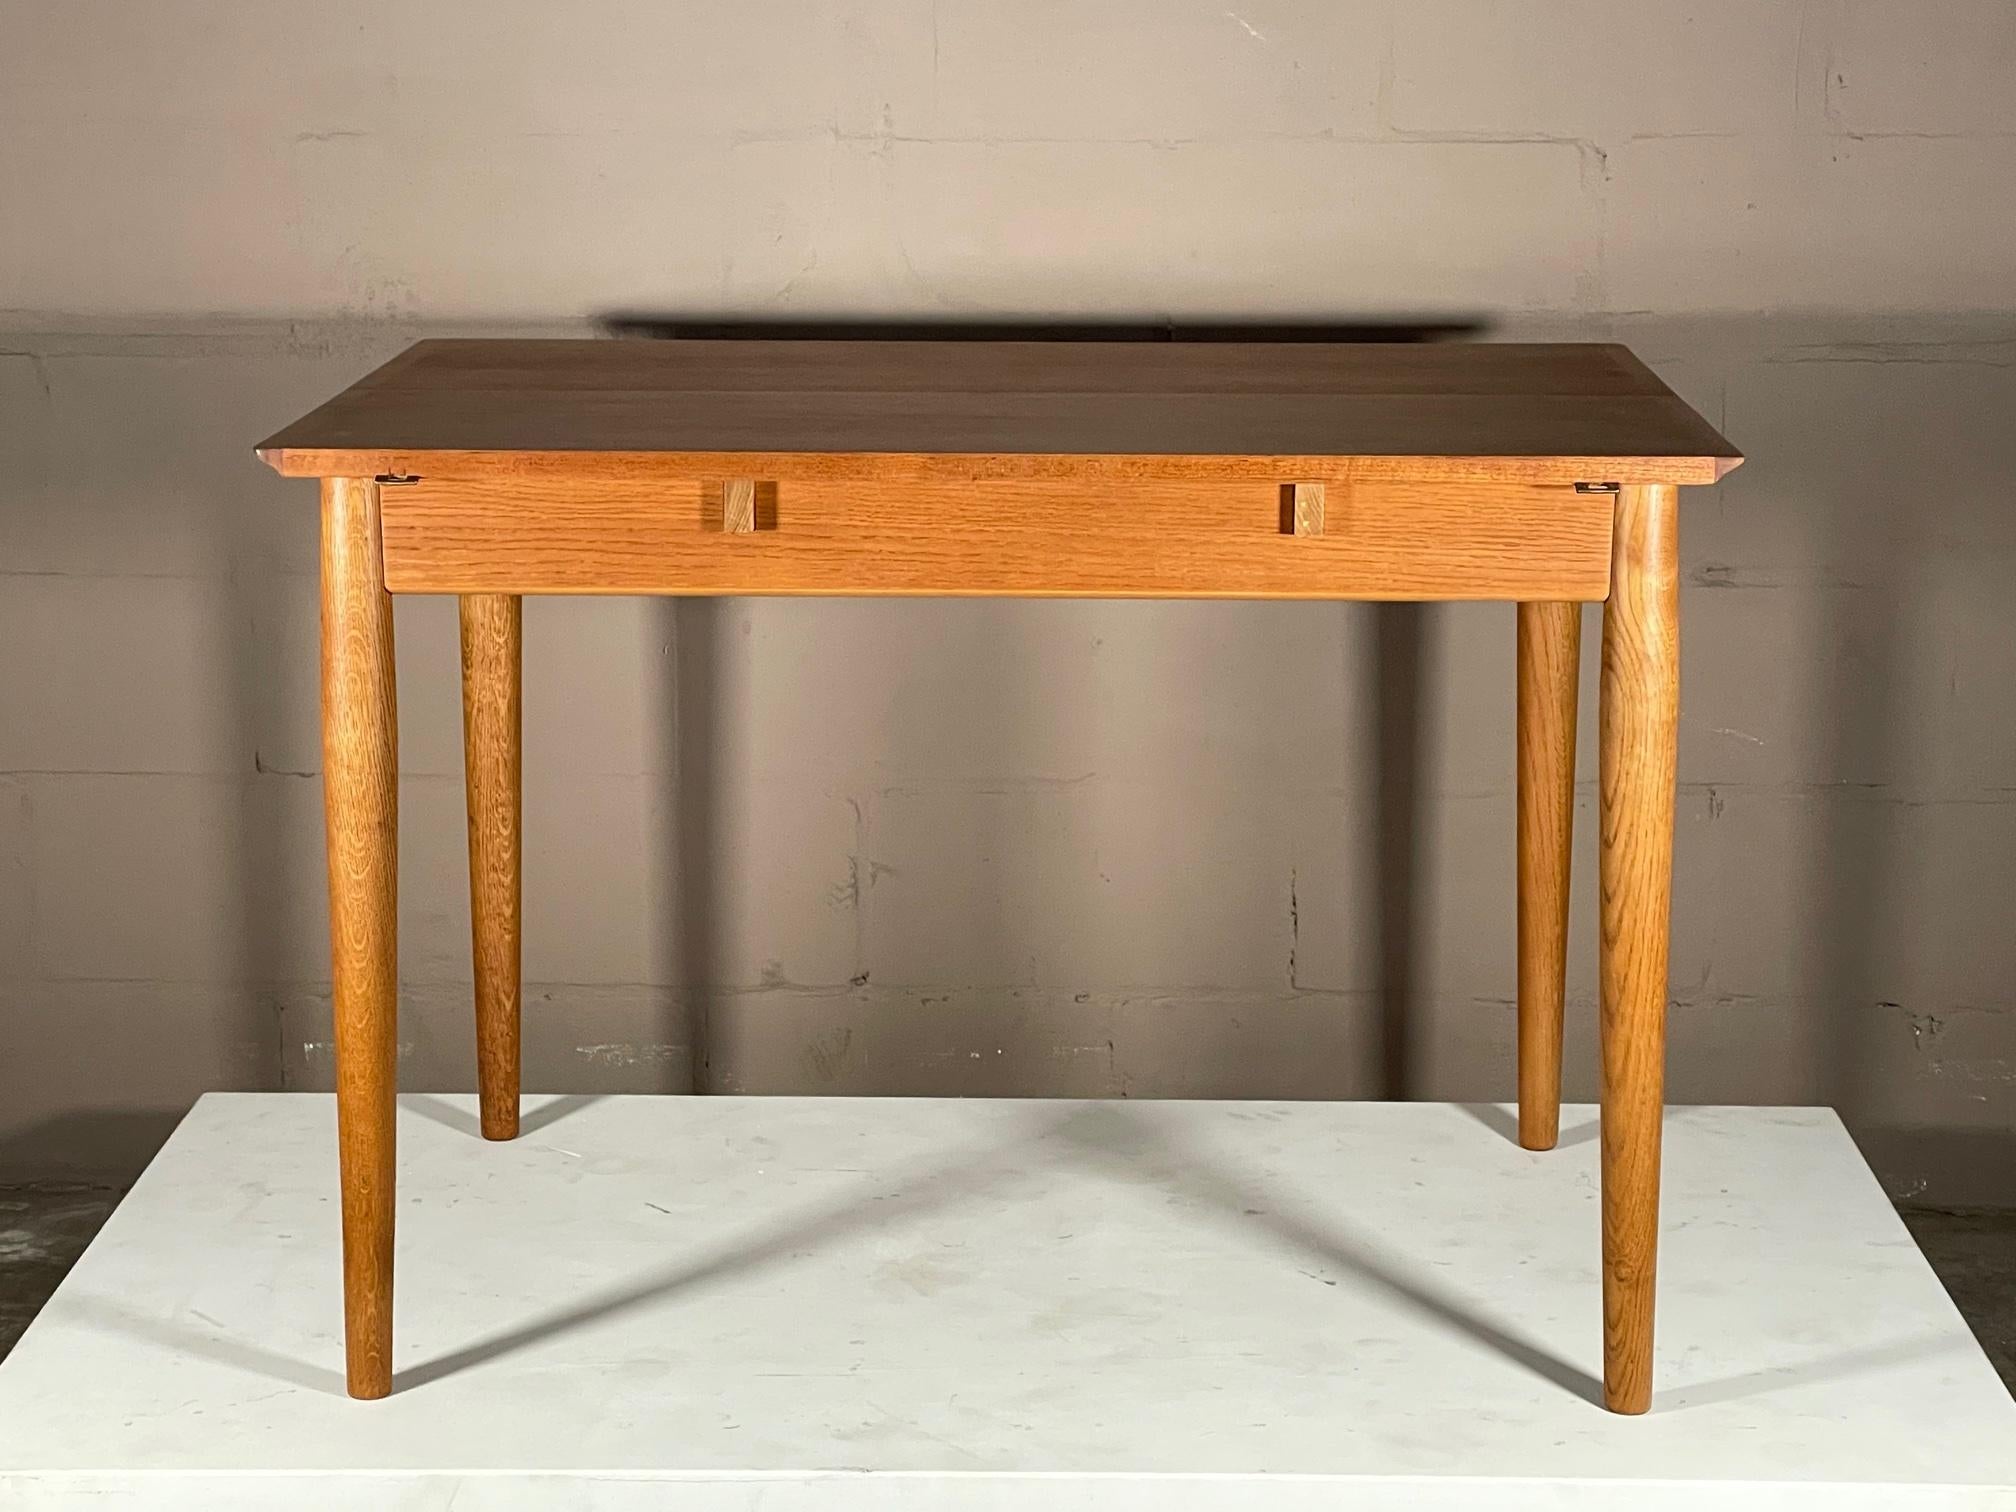 Fantastic early production Arne Vodder dining table, manufactured by SIbast, Denmark and distributed by George Tanier. Elegant and simple table, with two drop down leaves and two extension leaves allowing for a total length of 113.5